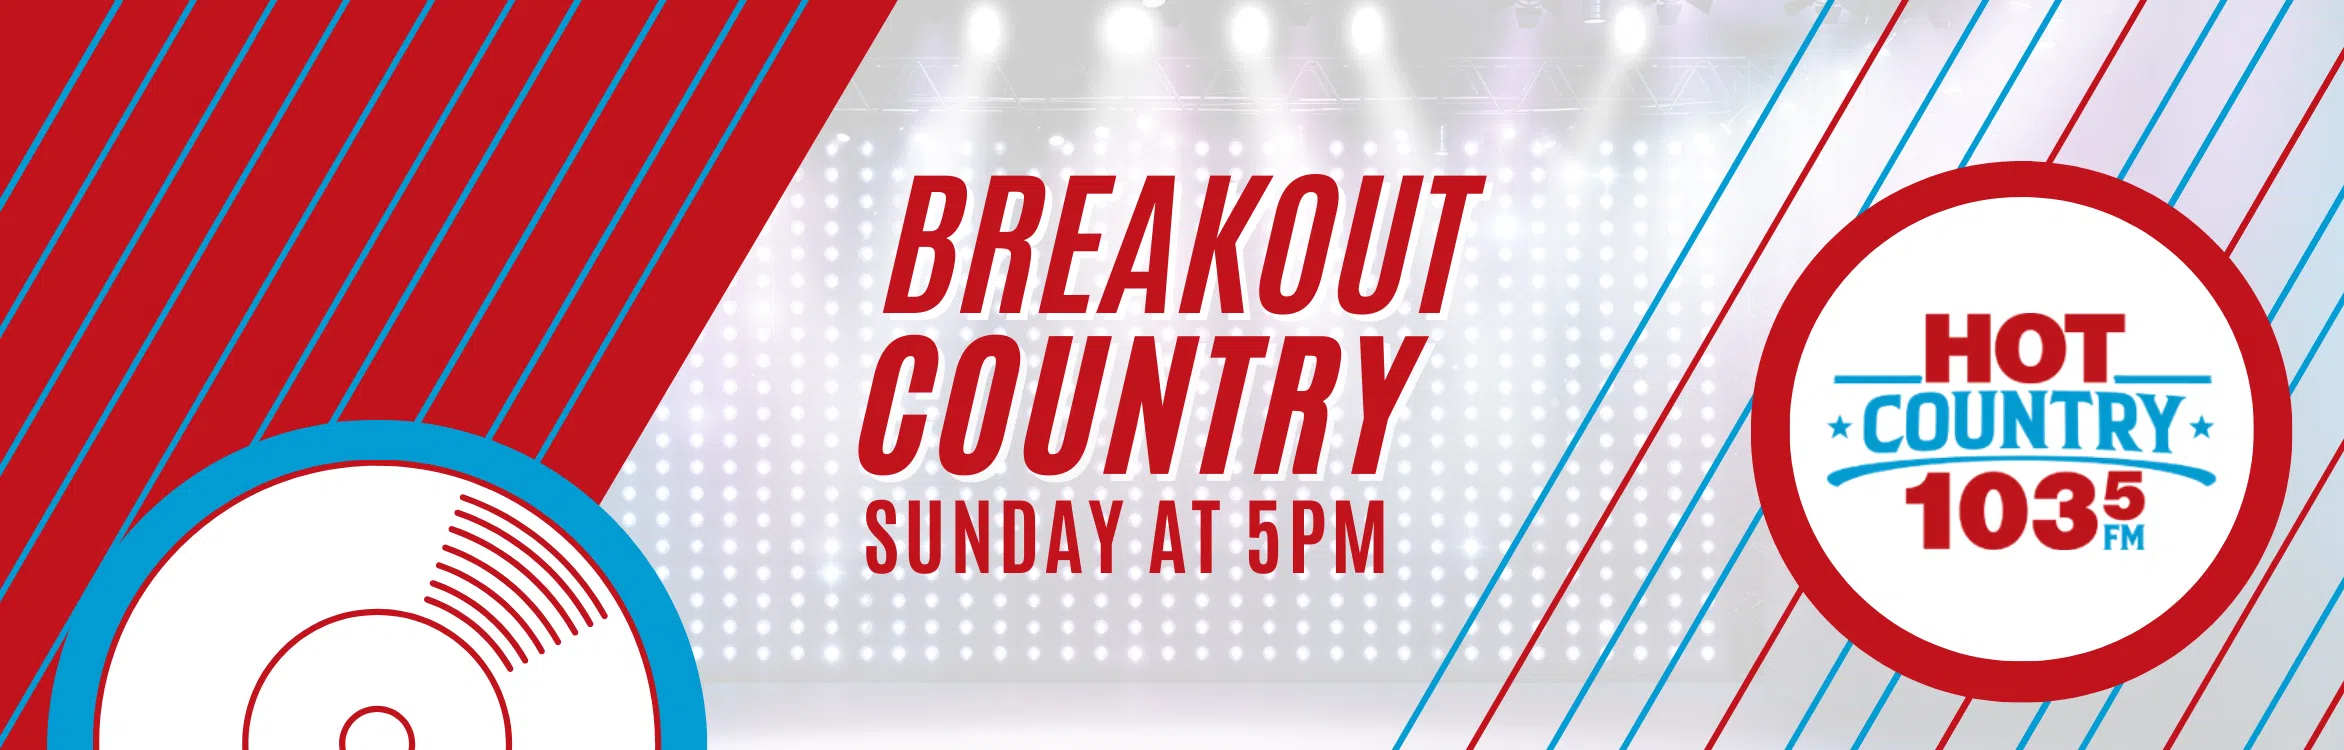 Feature: https://hotcountry1035.ca/breakout-country/